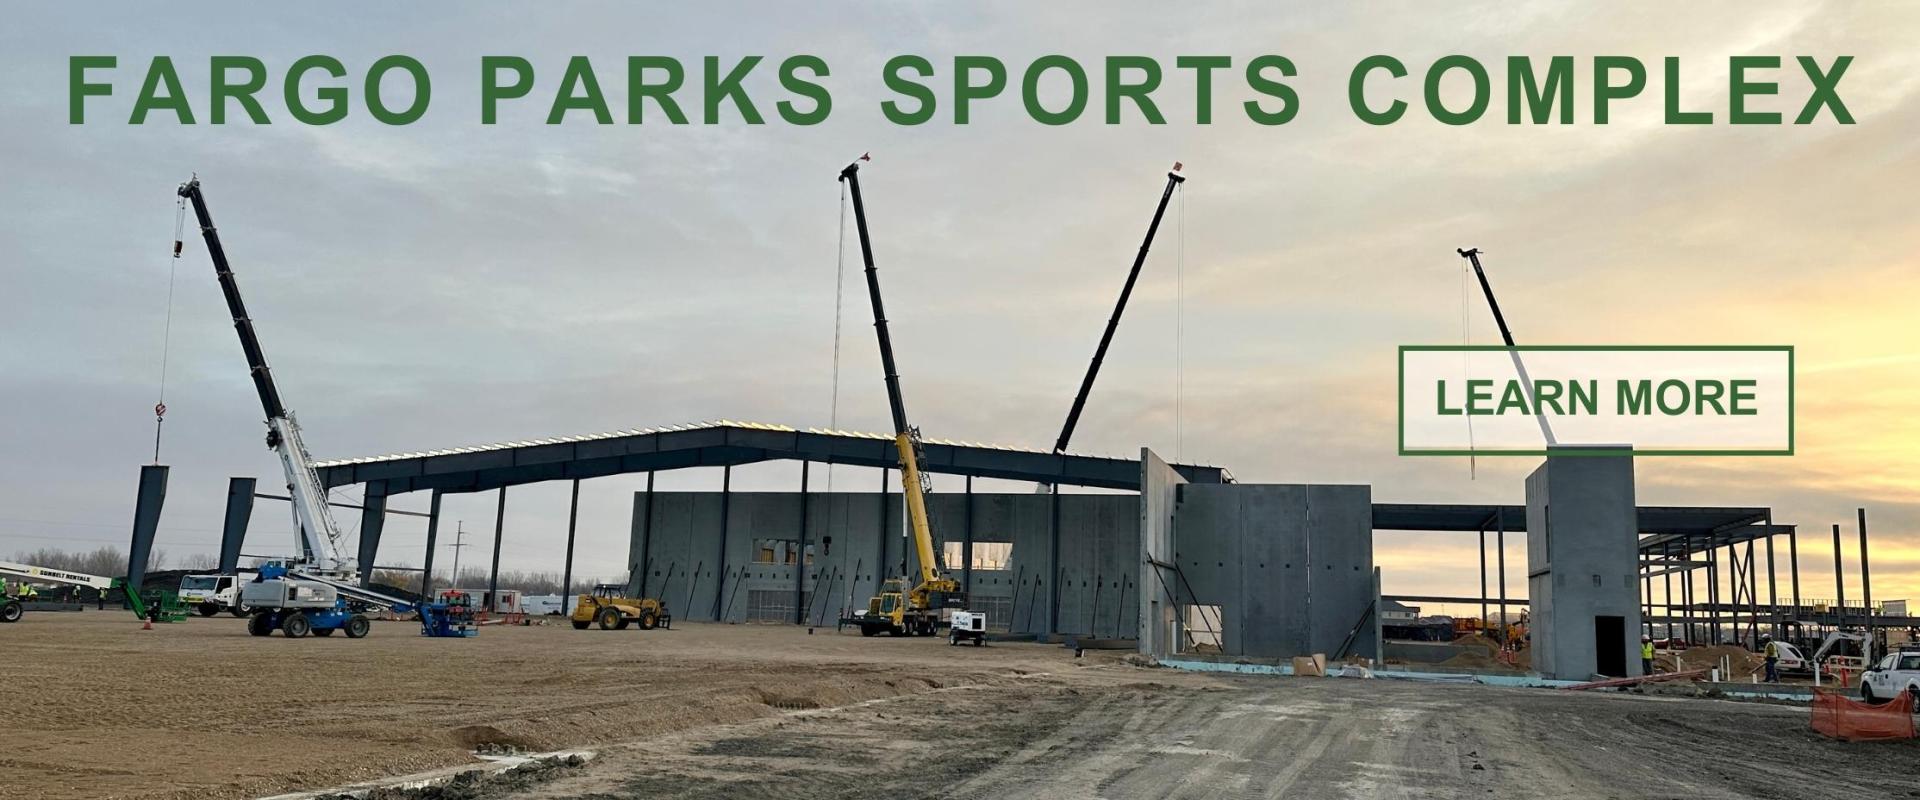 This photo shows construction at the Fargo Parks Sports Complex